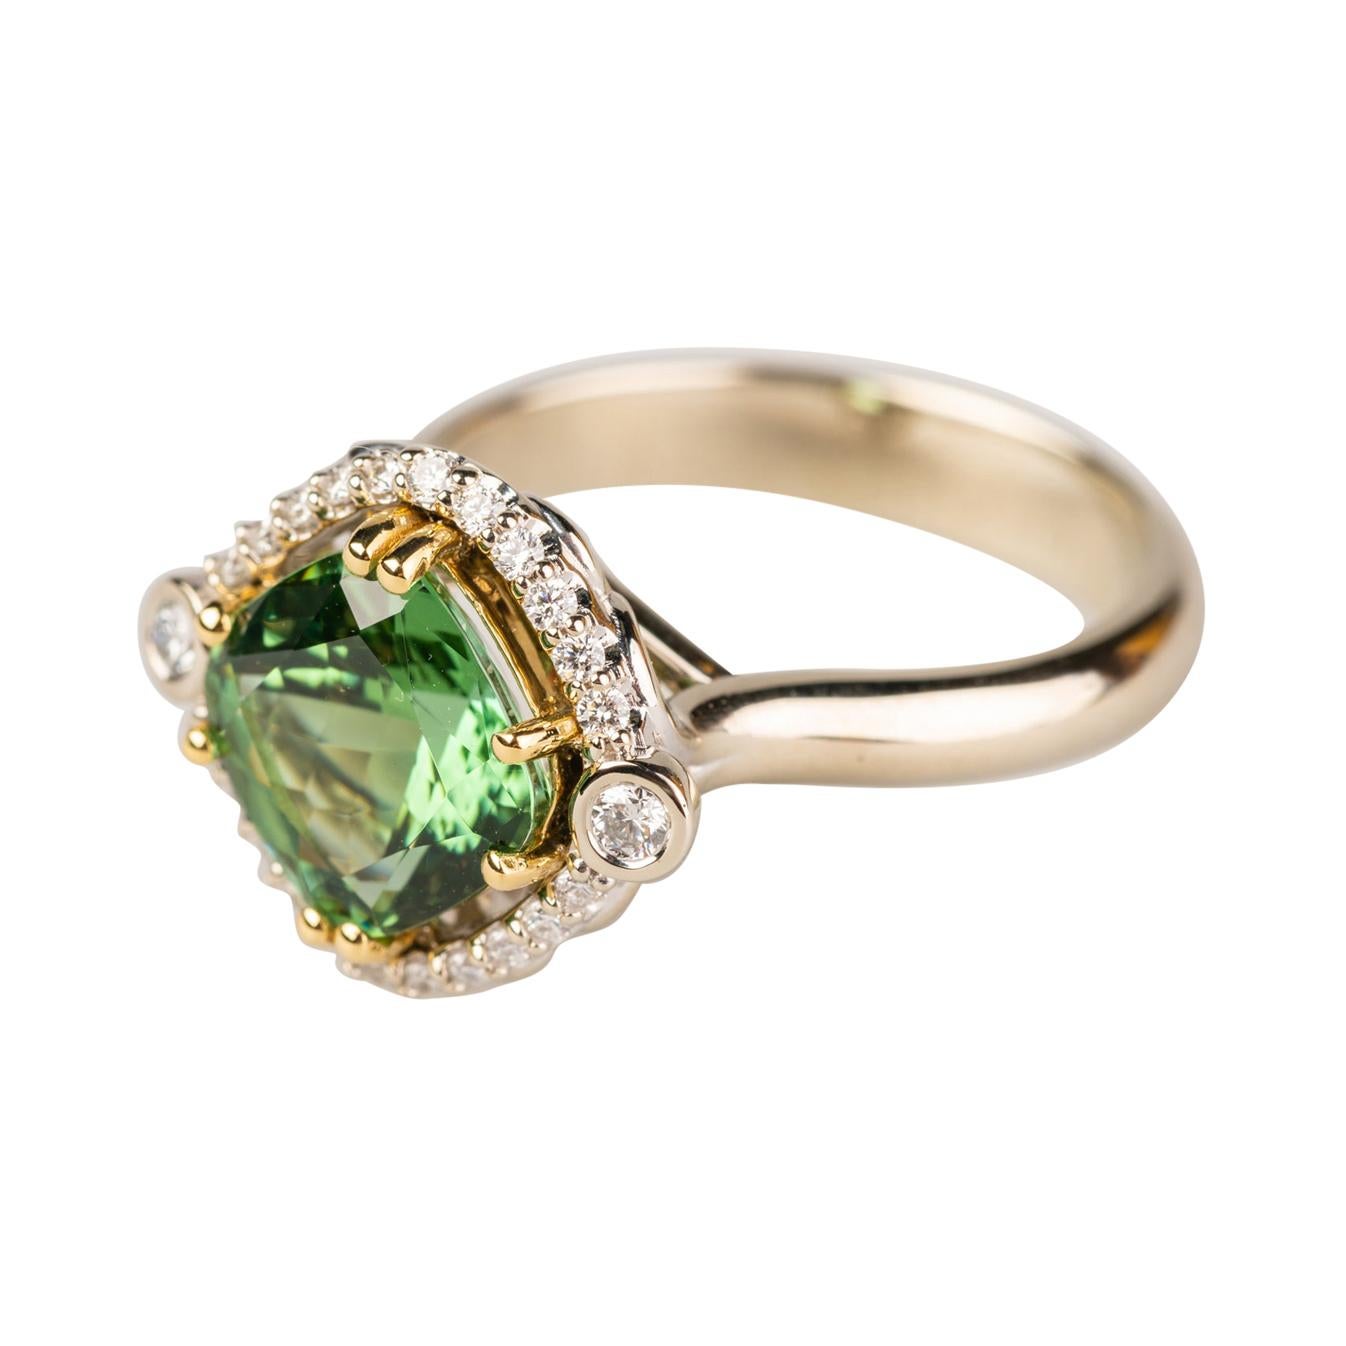 18k White and Yellow Gold 2.81 Carat Green Tourmaline Ring with a Diamond Halo